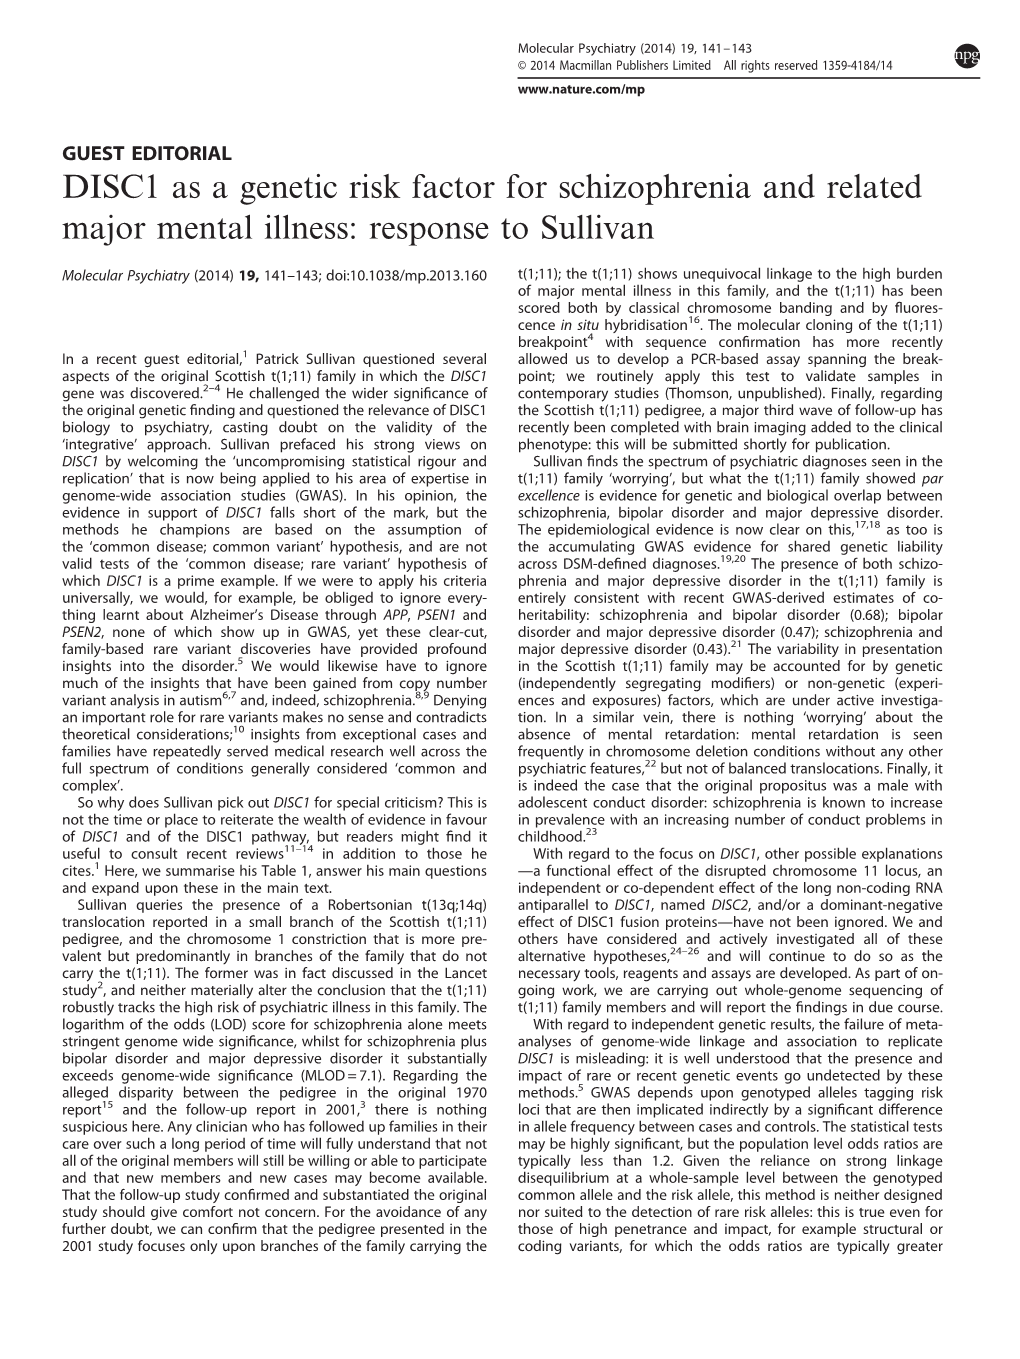 DISC1 As a Genetic Risk Factor for Schizophrenia and Related Major Mental Illness: Response to Sullivan